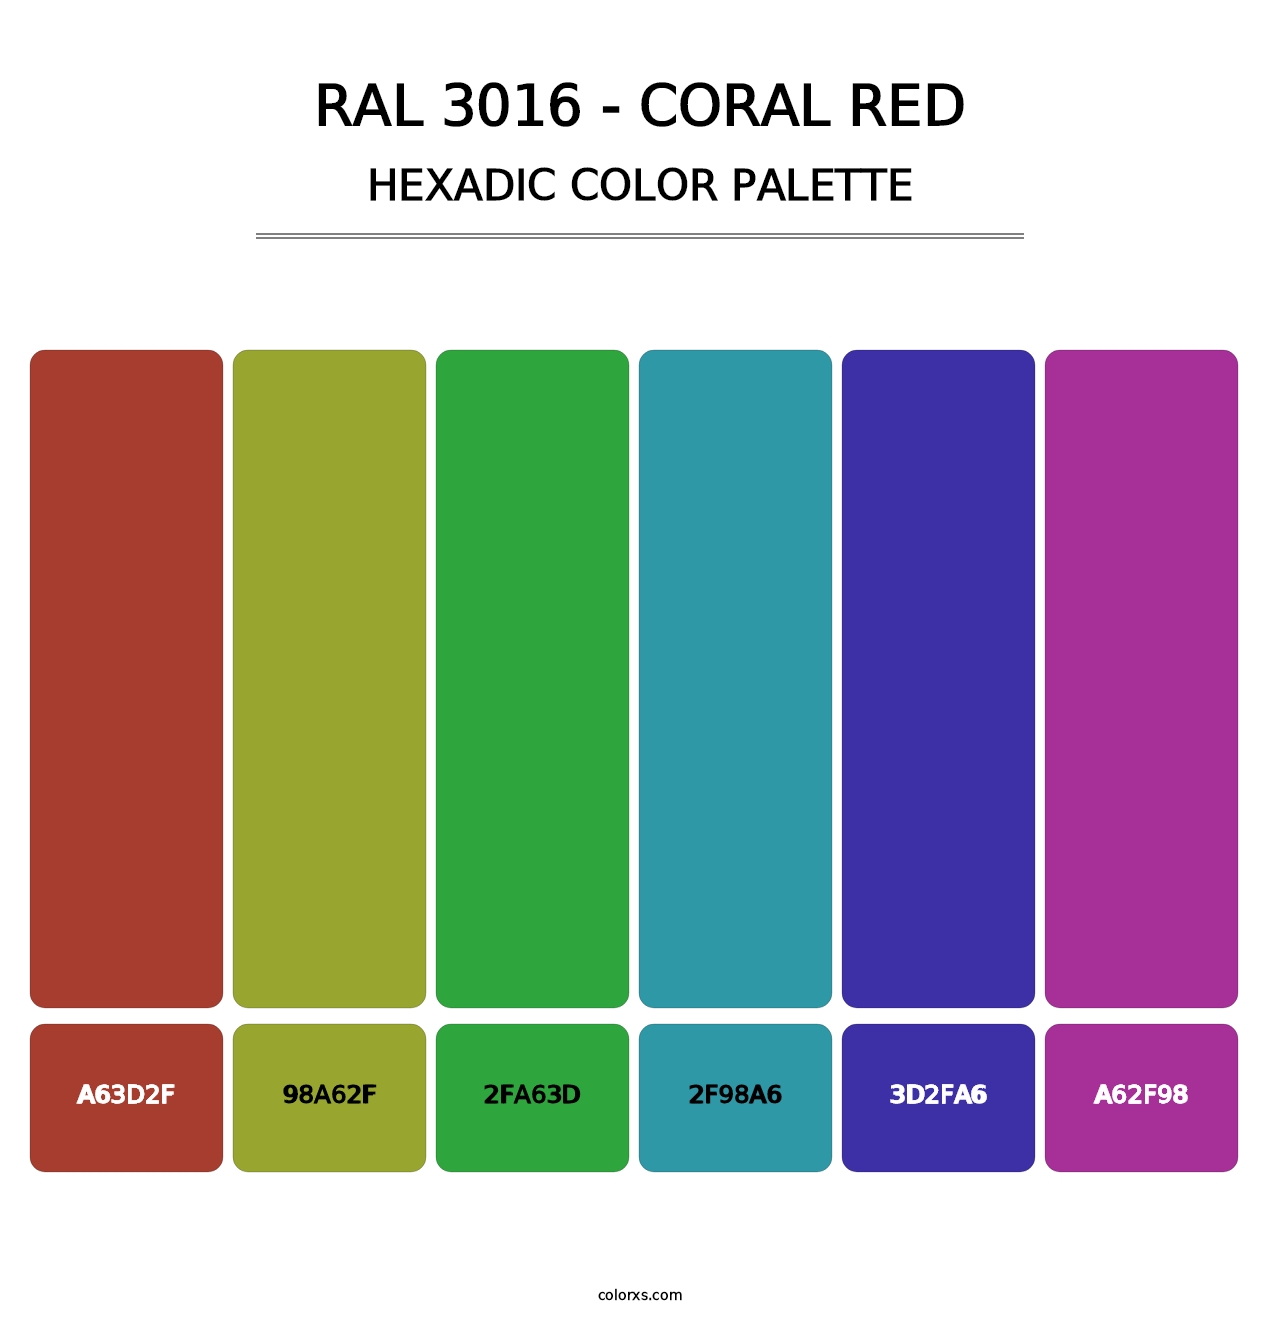 RAL 3016 - Coral Red - Hexadic Color Palette